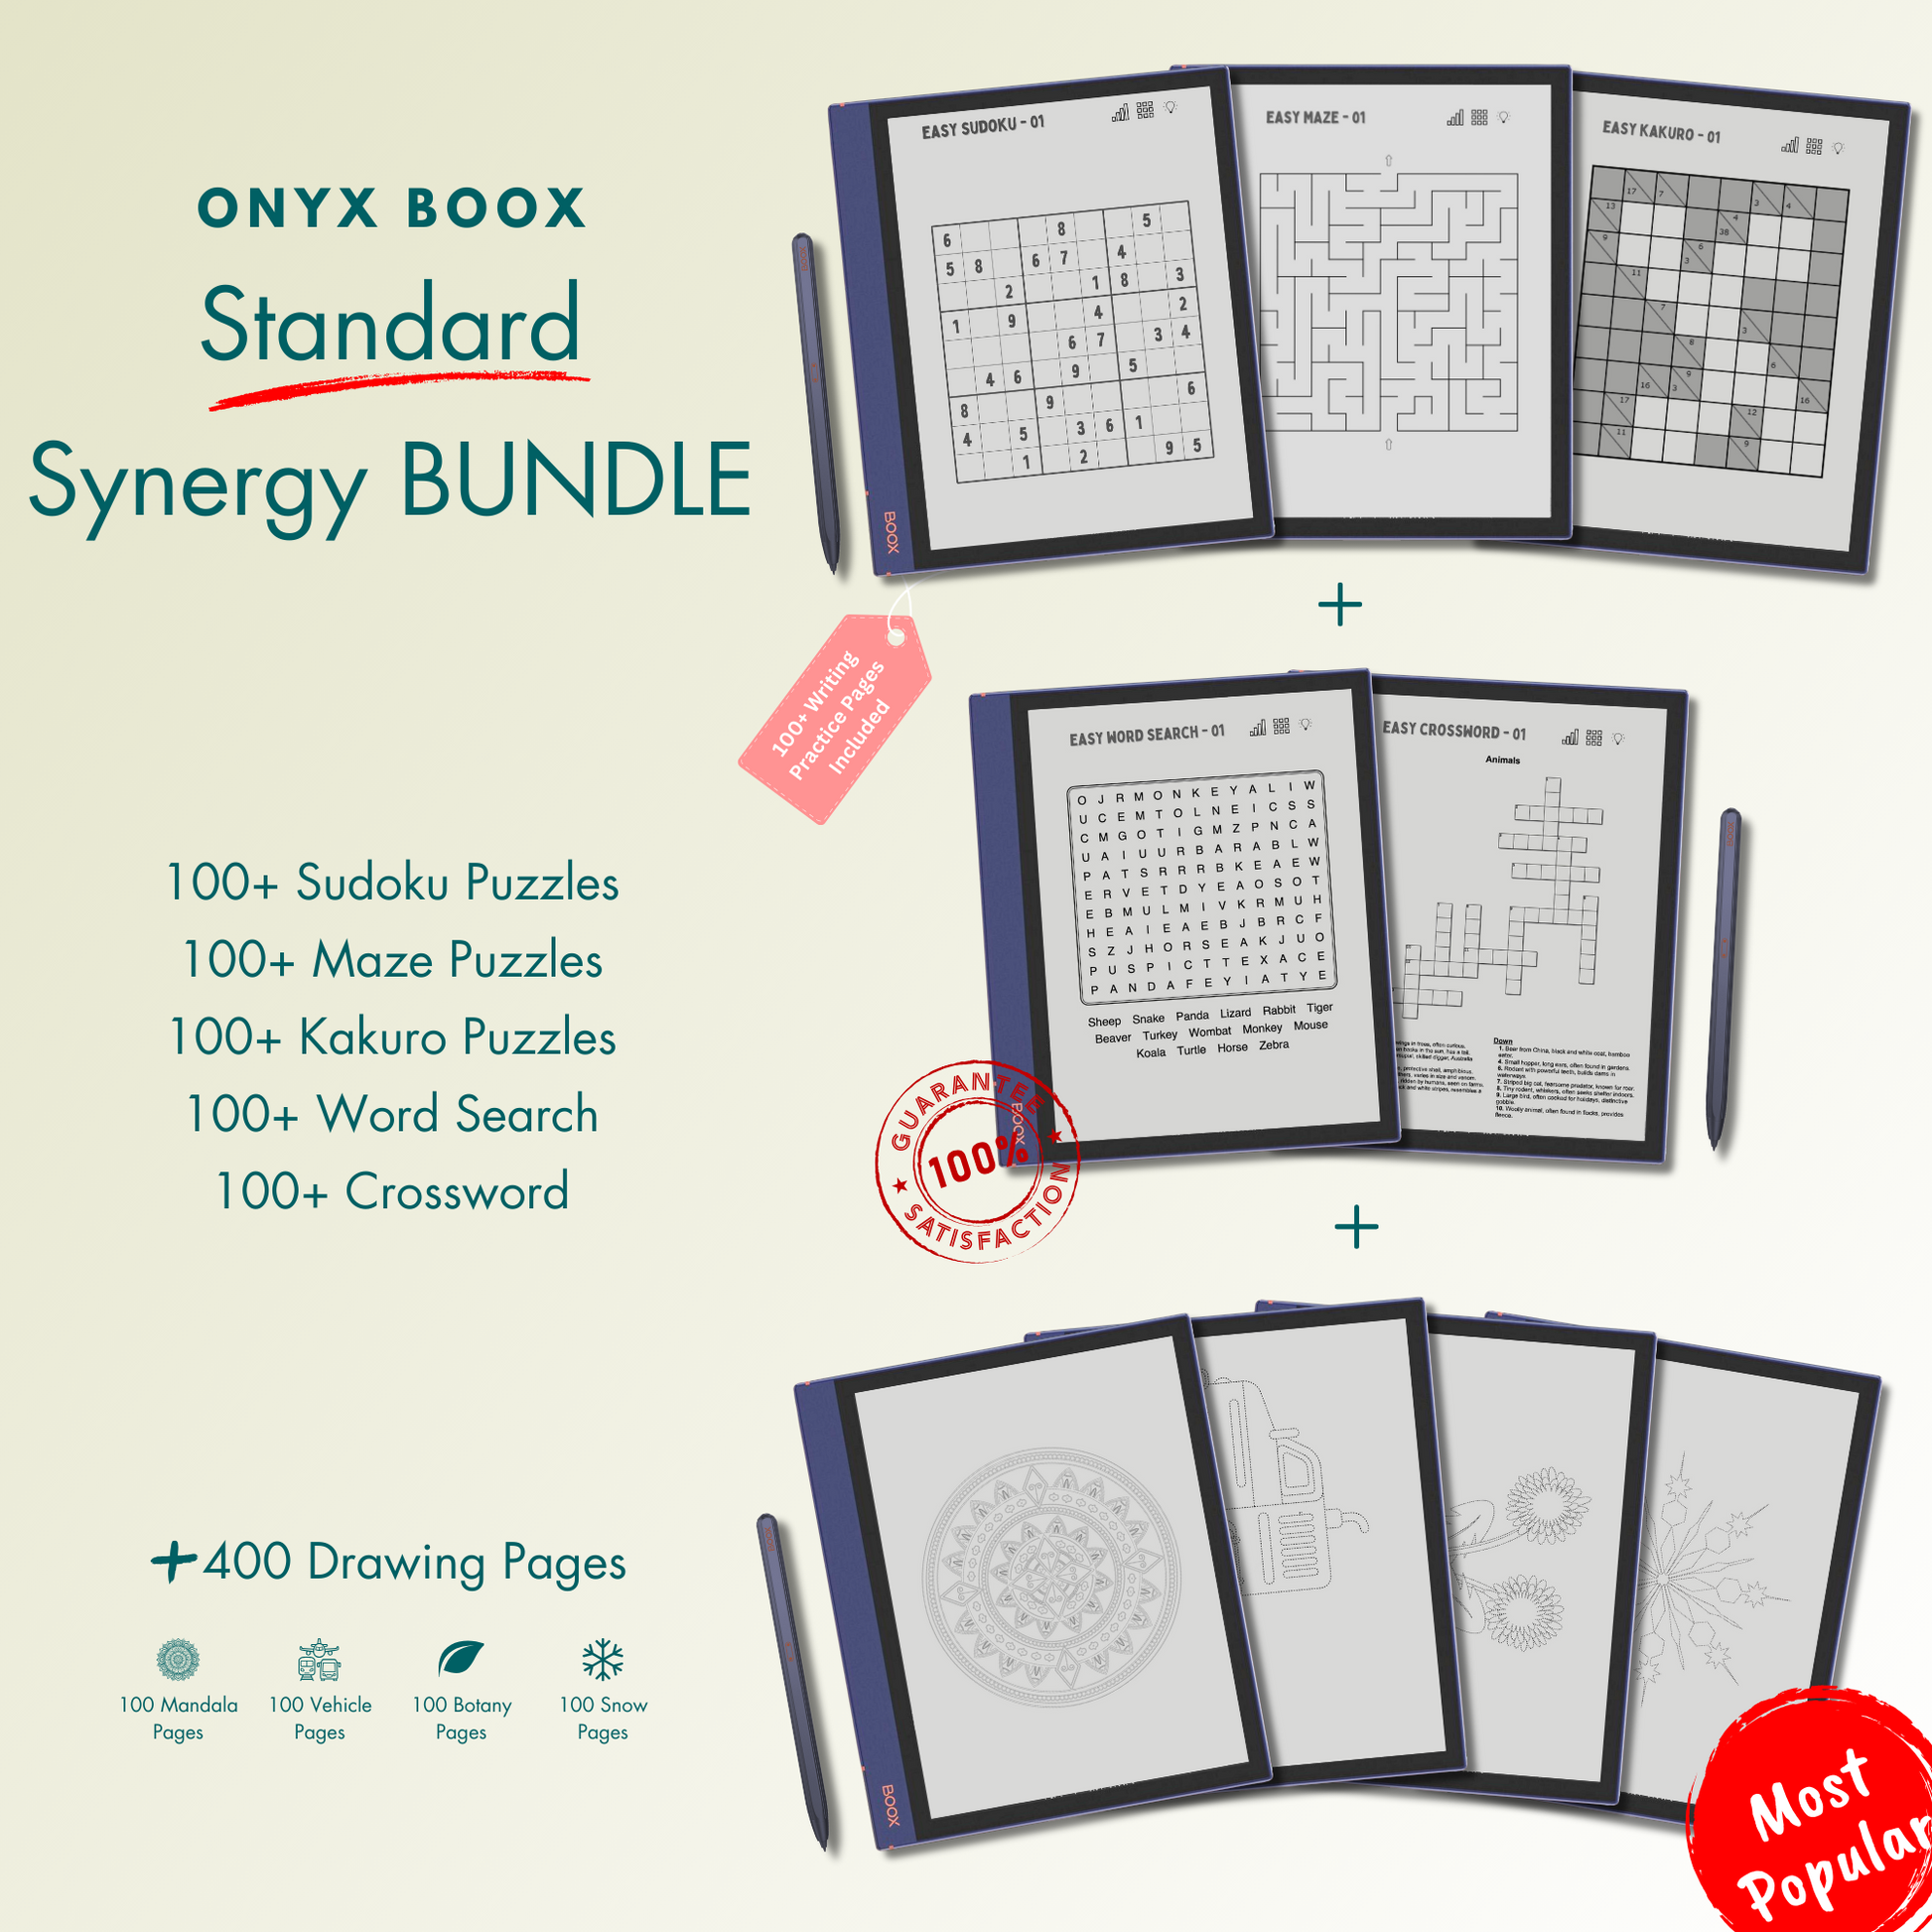 This is a Digital Bundle which includes Sudoku, Mazes, Kakuro, Word Search and Crossword Puzzles tailored for Onyx Boox. Compatible with Boox Note Air 1, Boox Note Air 2, Boox Note Air Plus, Boox Nova Air, Boox Nova Air C, Boox Tab Ultra and Boox Tab Ultra C.